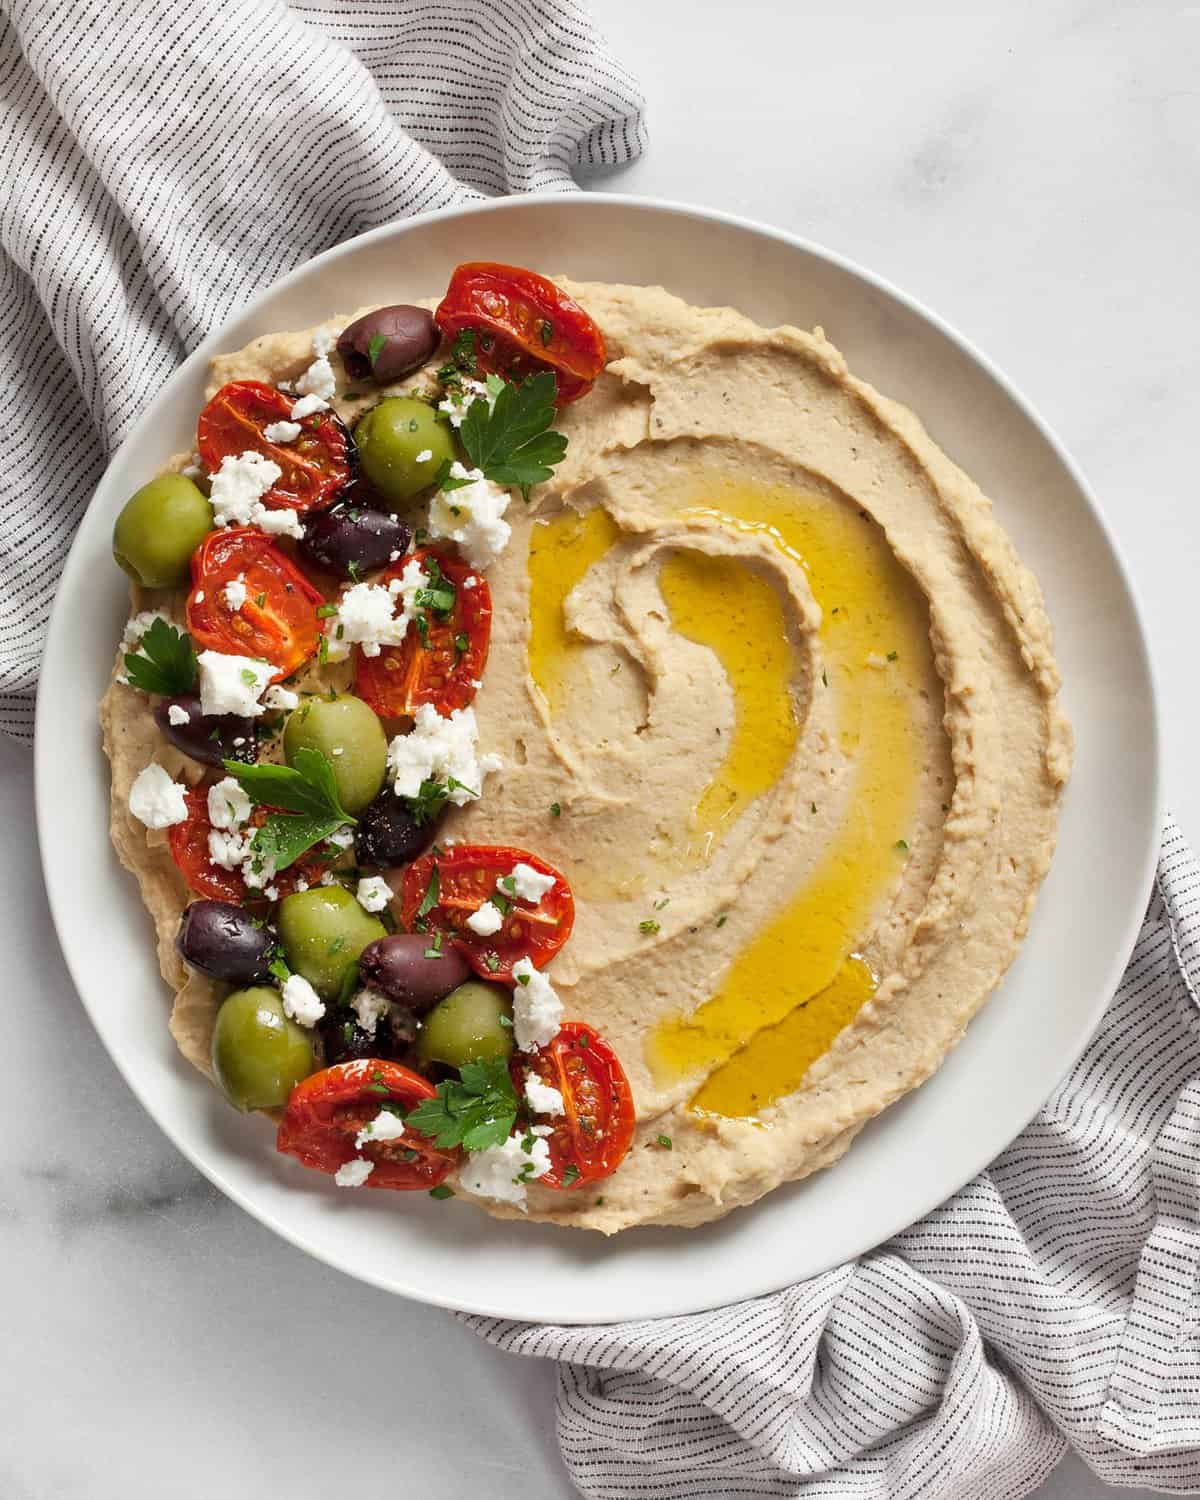 Roasted garlic hummus topped with roasted tomatoes, olives and feta spread on a plate.